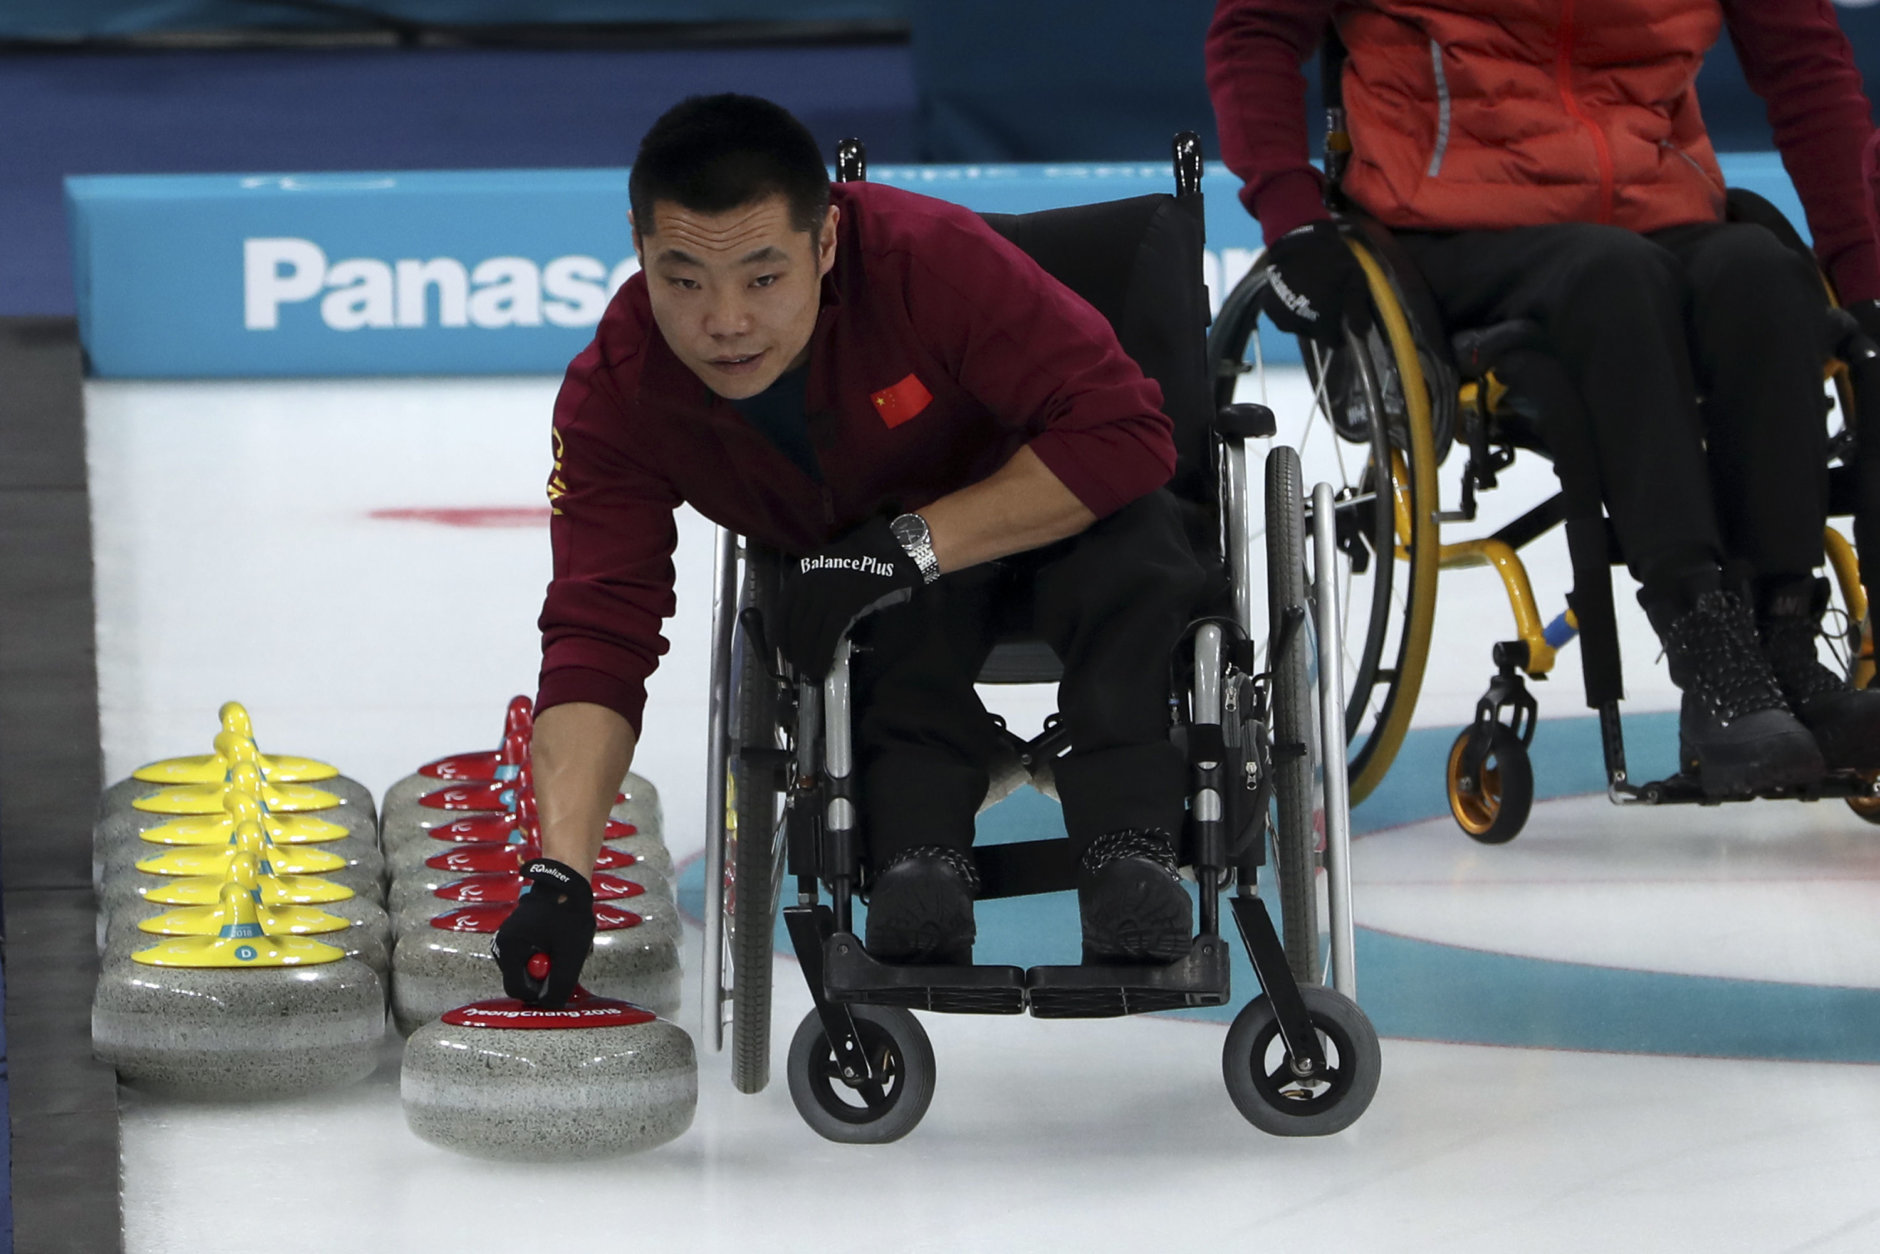 China's Liu Wei prepares a stone for his teammates as they compete against Norway in the Wheelchair Curling gold medal match for the 2018 Winter Paralympics at the Gangneung Curling Centre in Gangneung, South Korea, Saturday, March 17, 2018.(AP Photo/Ng Han Guan)